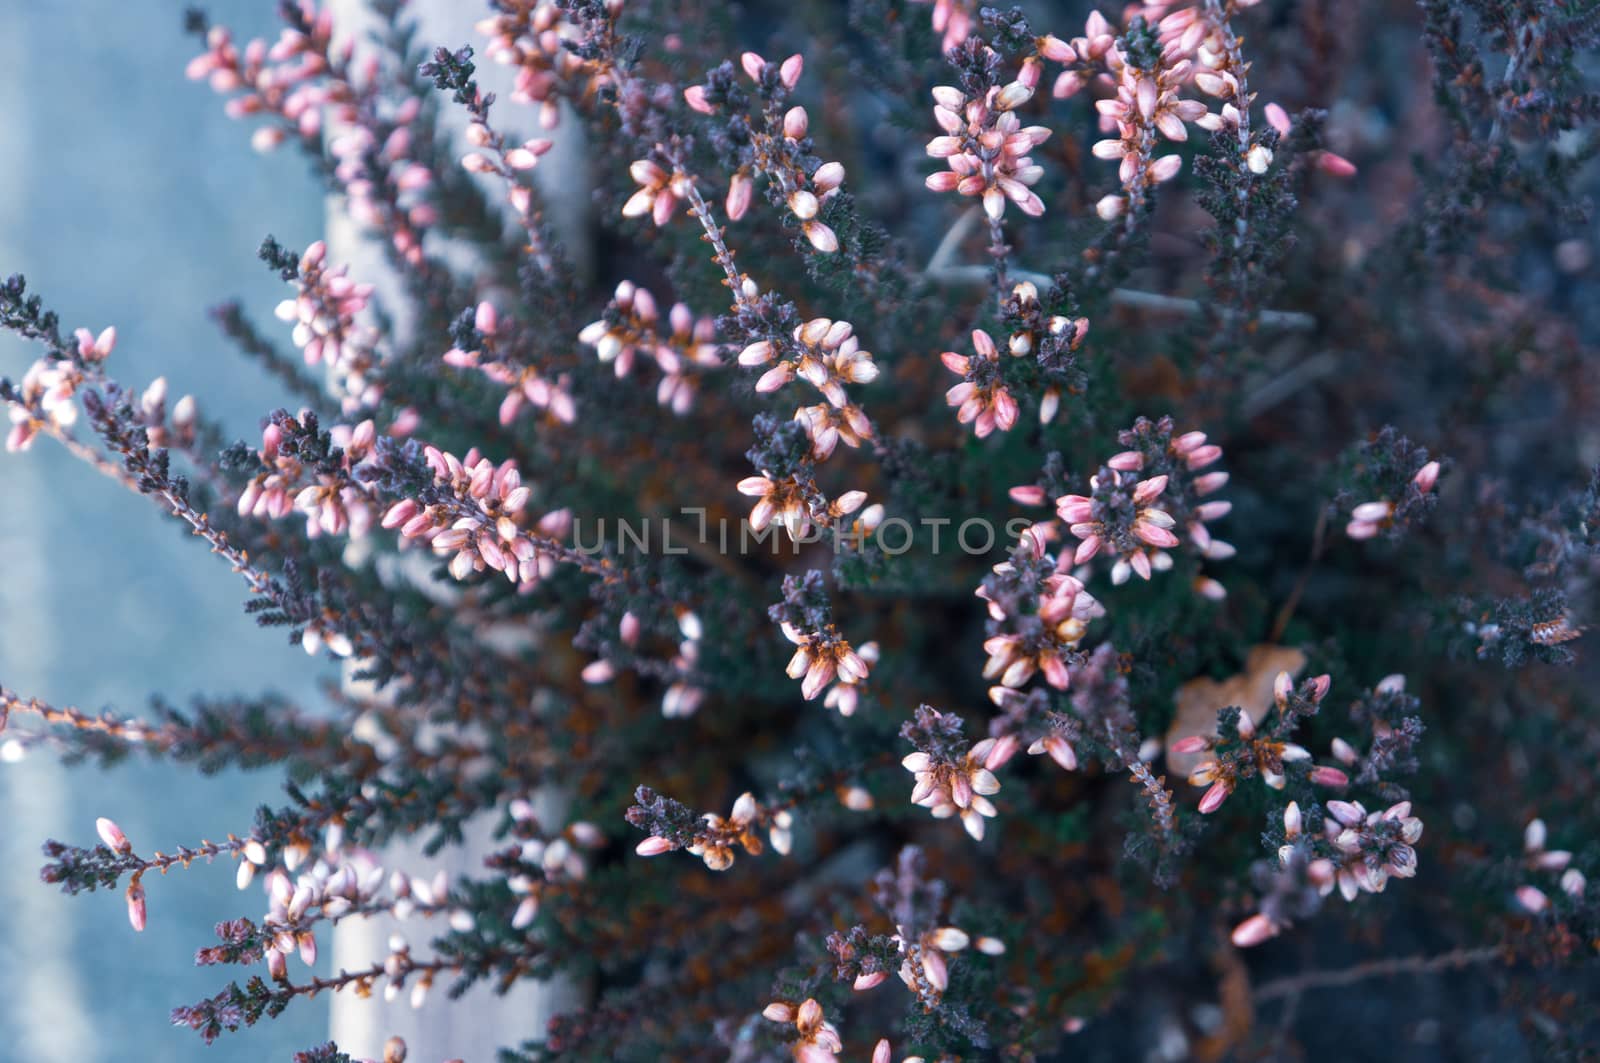 Coold toned close up of small pink flower buds growing unevenly on dark spiky branches towards the light. Shot from above in daylight from the left side. Spring, Valentine'd day and mothers day concept.